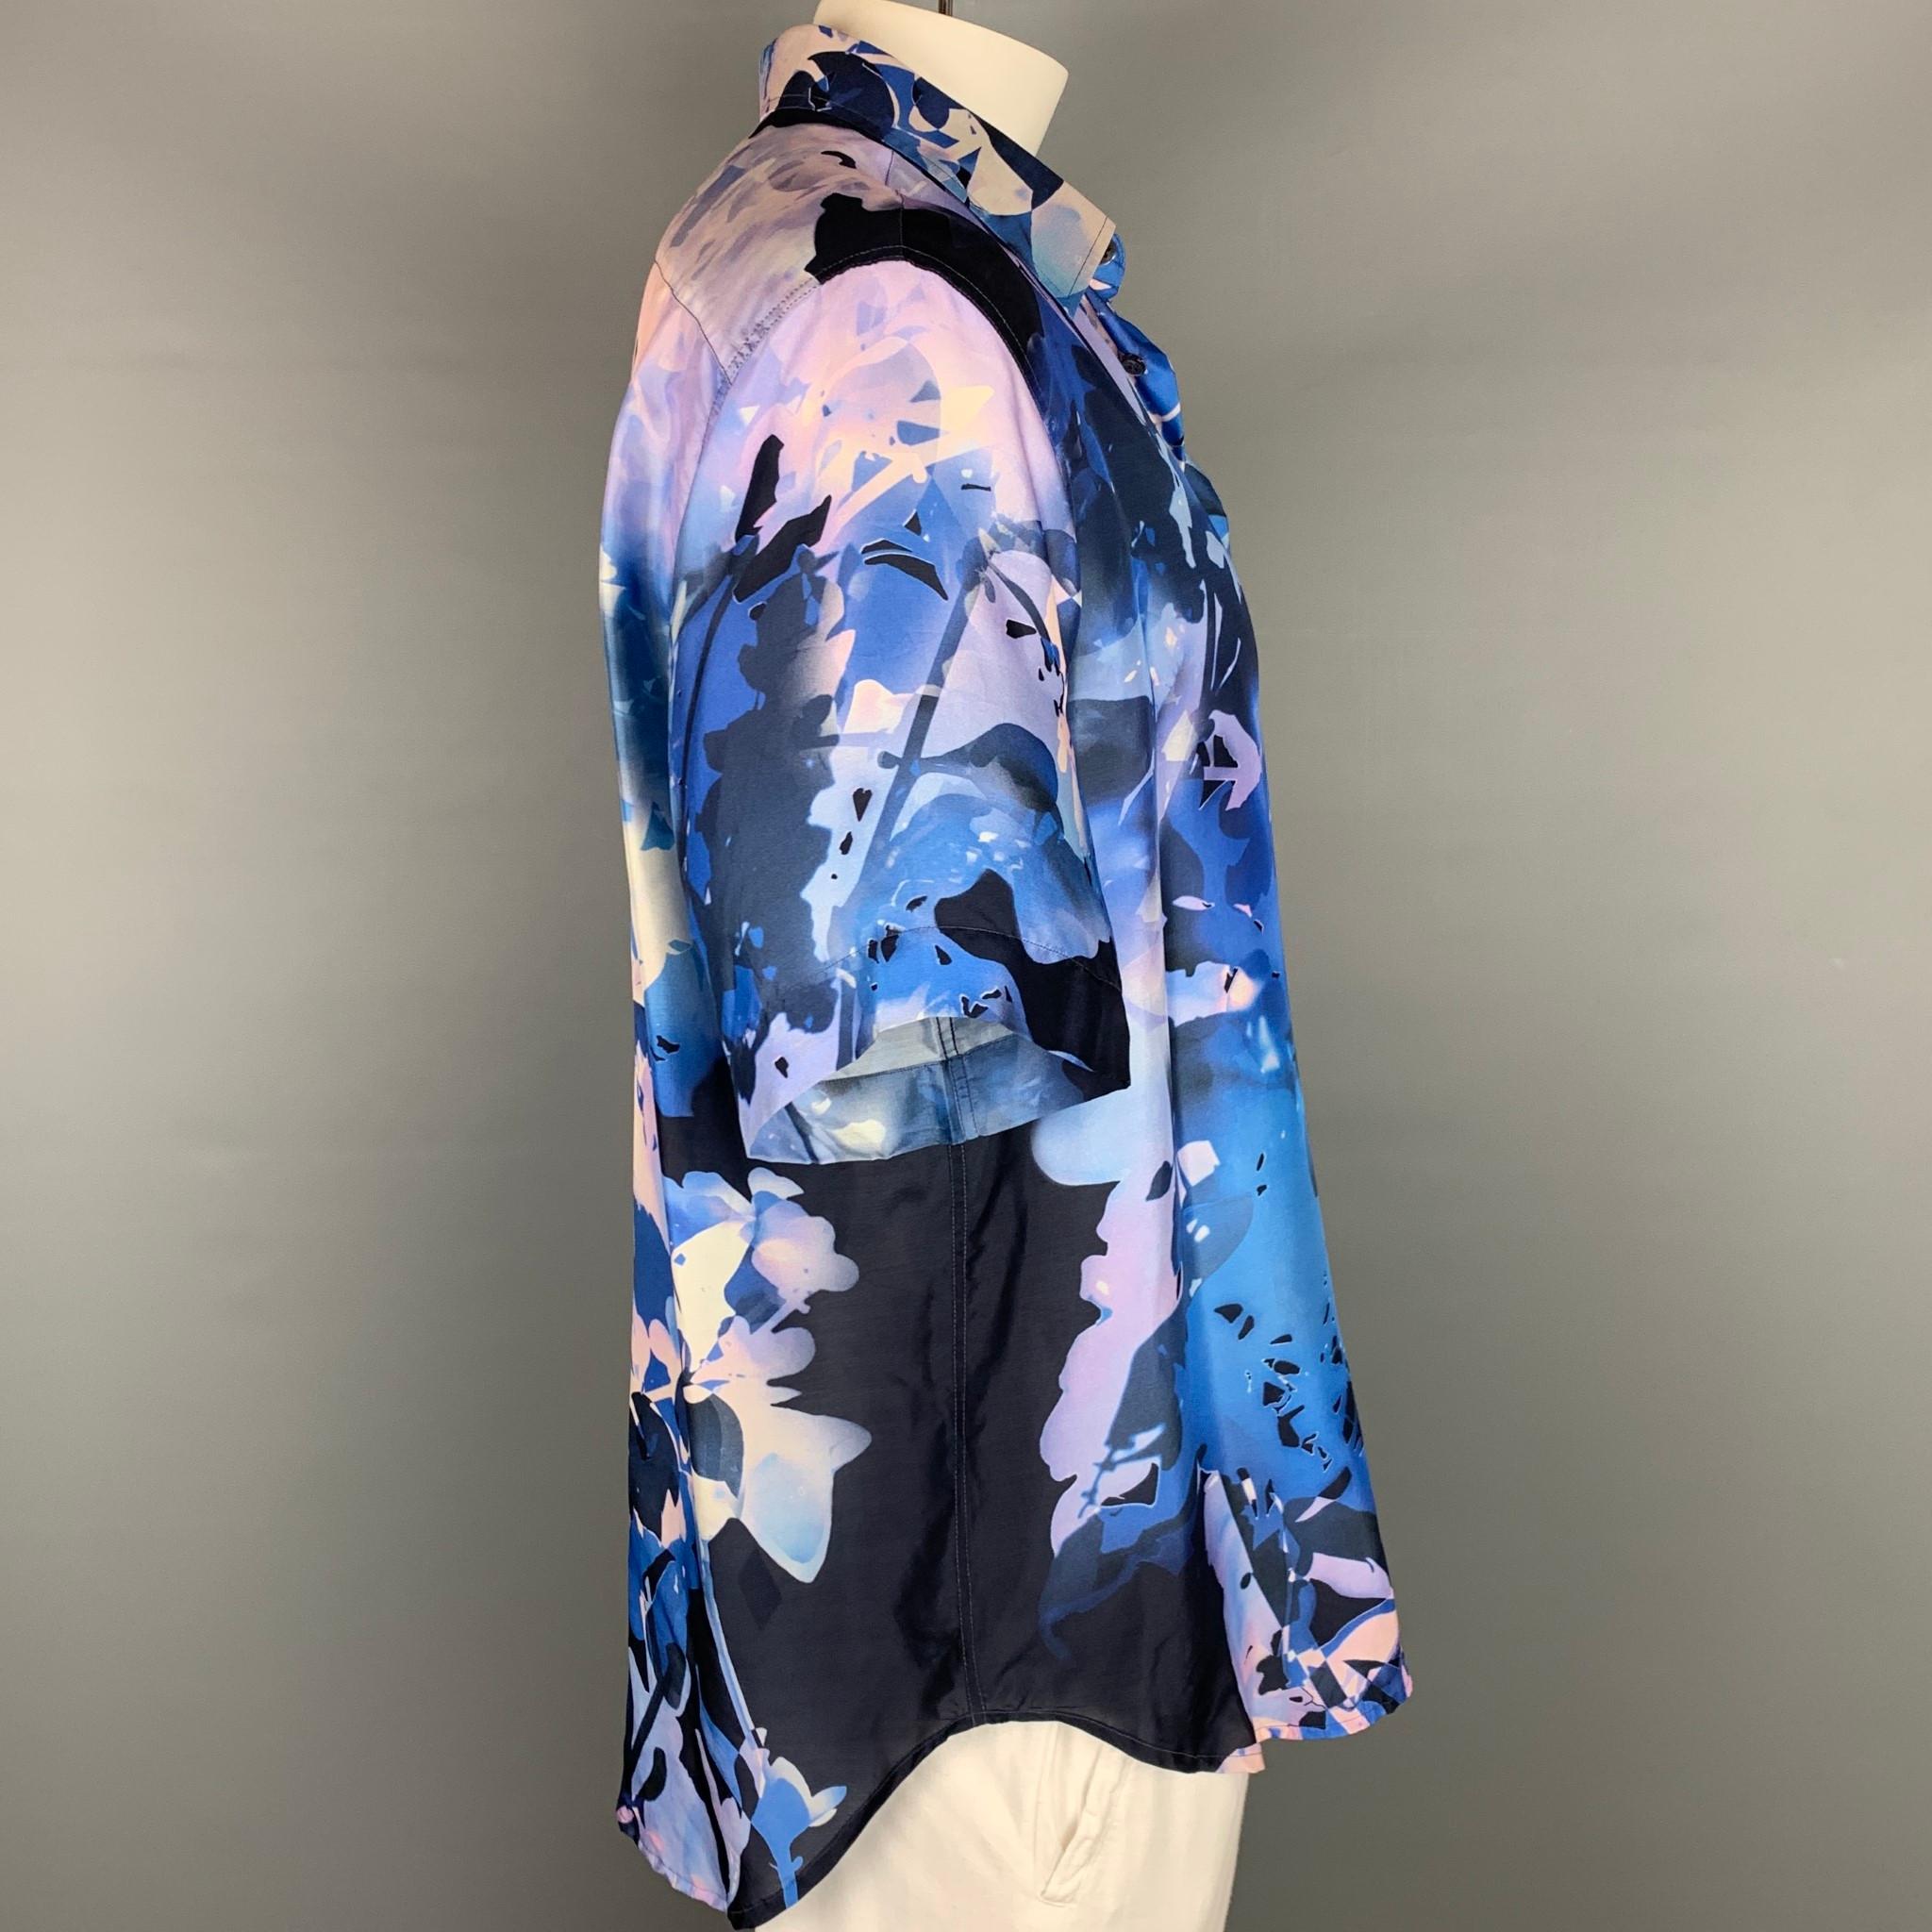 BRIONI short sleeve shirt comes in a blue & purple abstract floral silk featuring a spread collar and a buttoned closure. Made in Italy.

Very Good Pre-Owned Condition.
Marked: XXL

Measurements:

Shoulder: 19.5 in.
Chest: 48 in.
Sleeve: 11